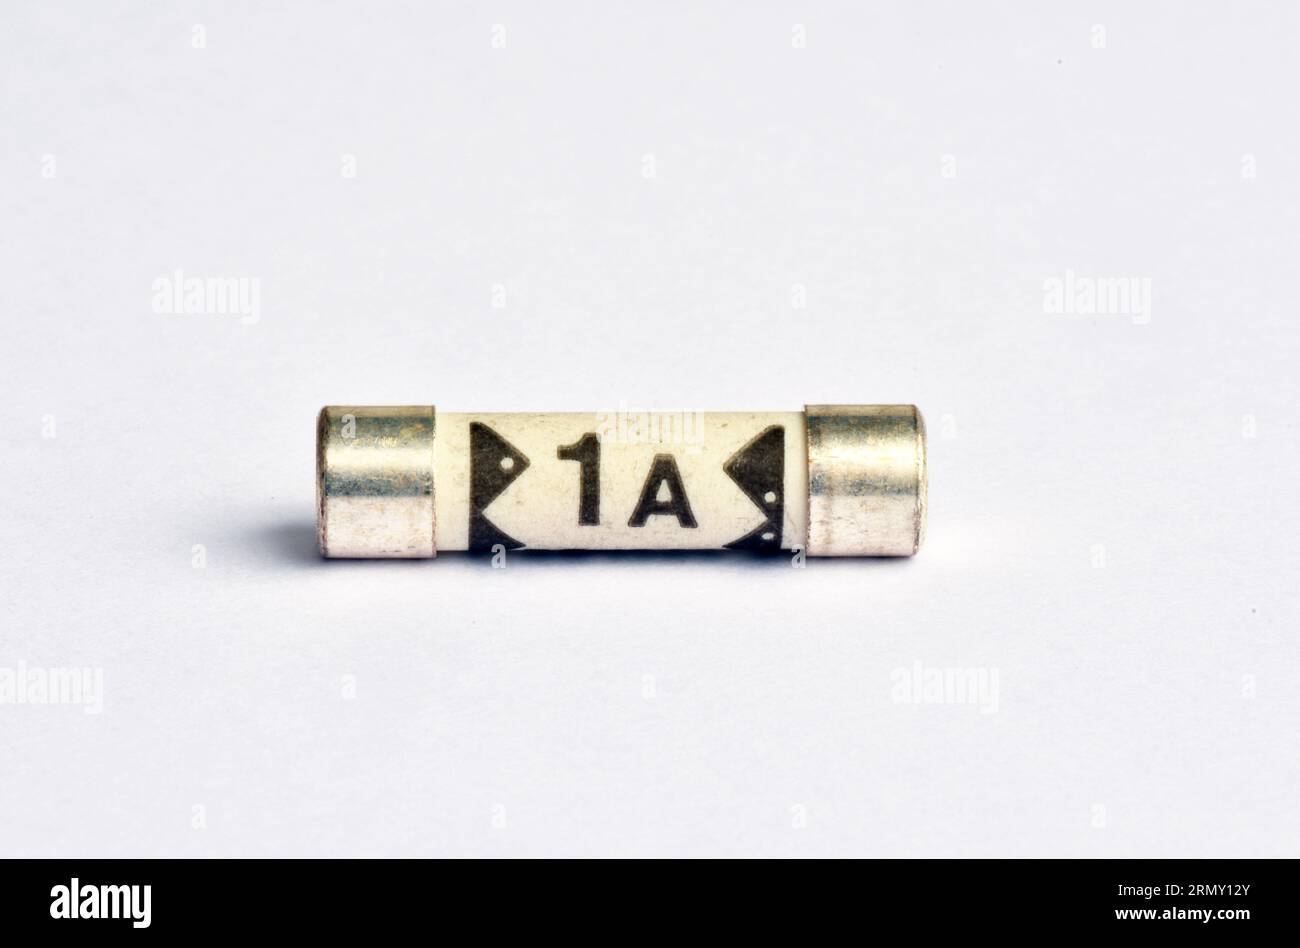 Plug top fuse to BS 1362.1'x 1/4' Ceramic bodied Fuse.1A shown. Stock Photo